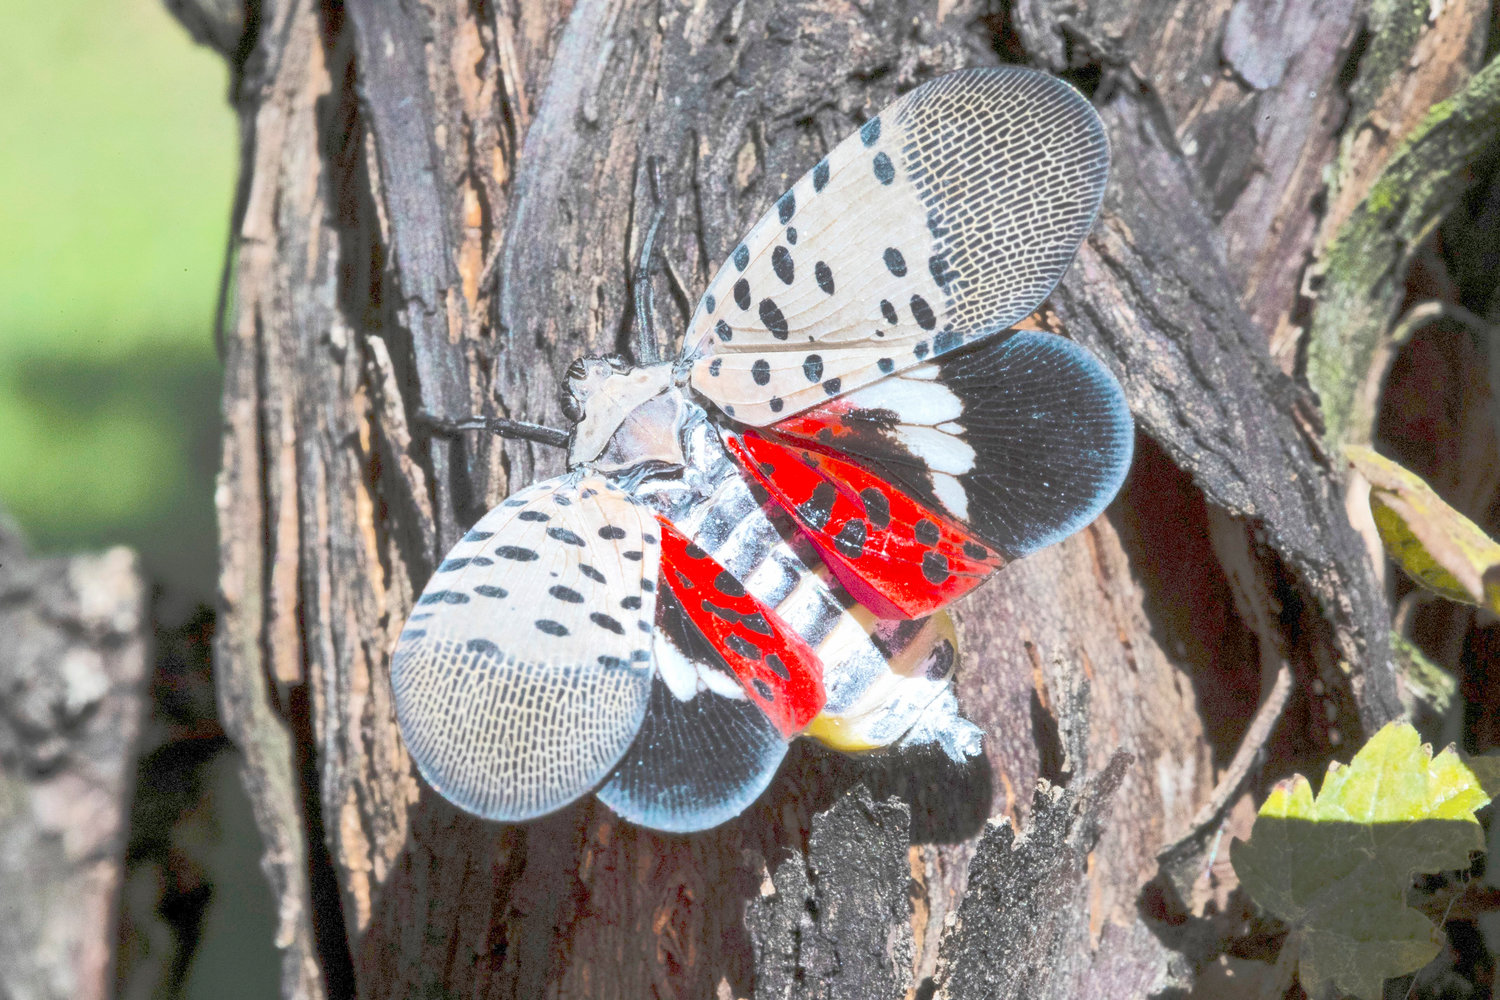 A spotted lanternfly at a vineyard in Kutztown, Pennsylvania. The spotted lanternfly may be a threat to a number of agricultural segments across the state.